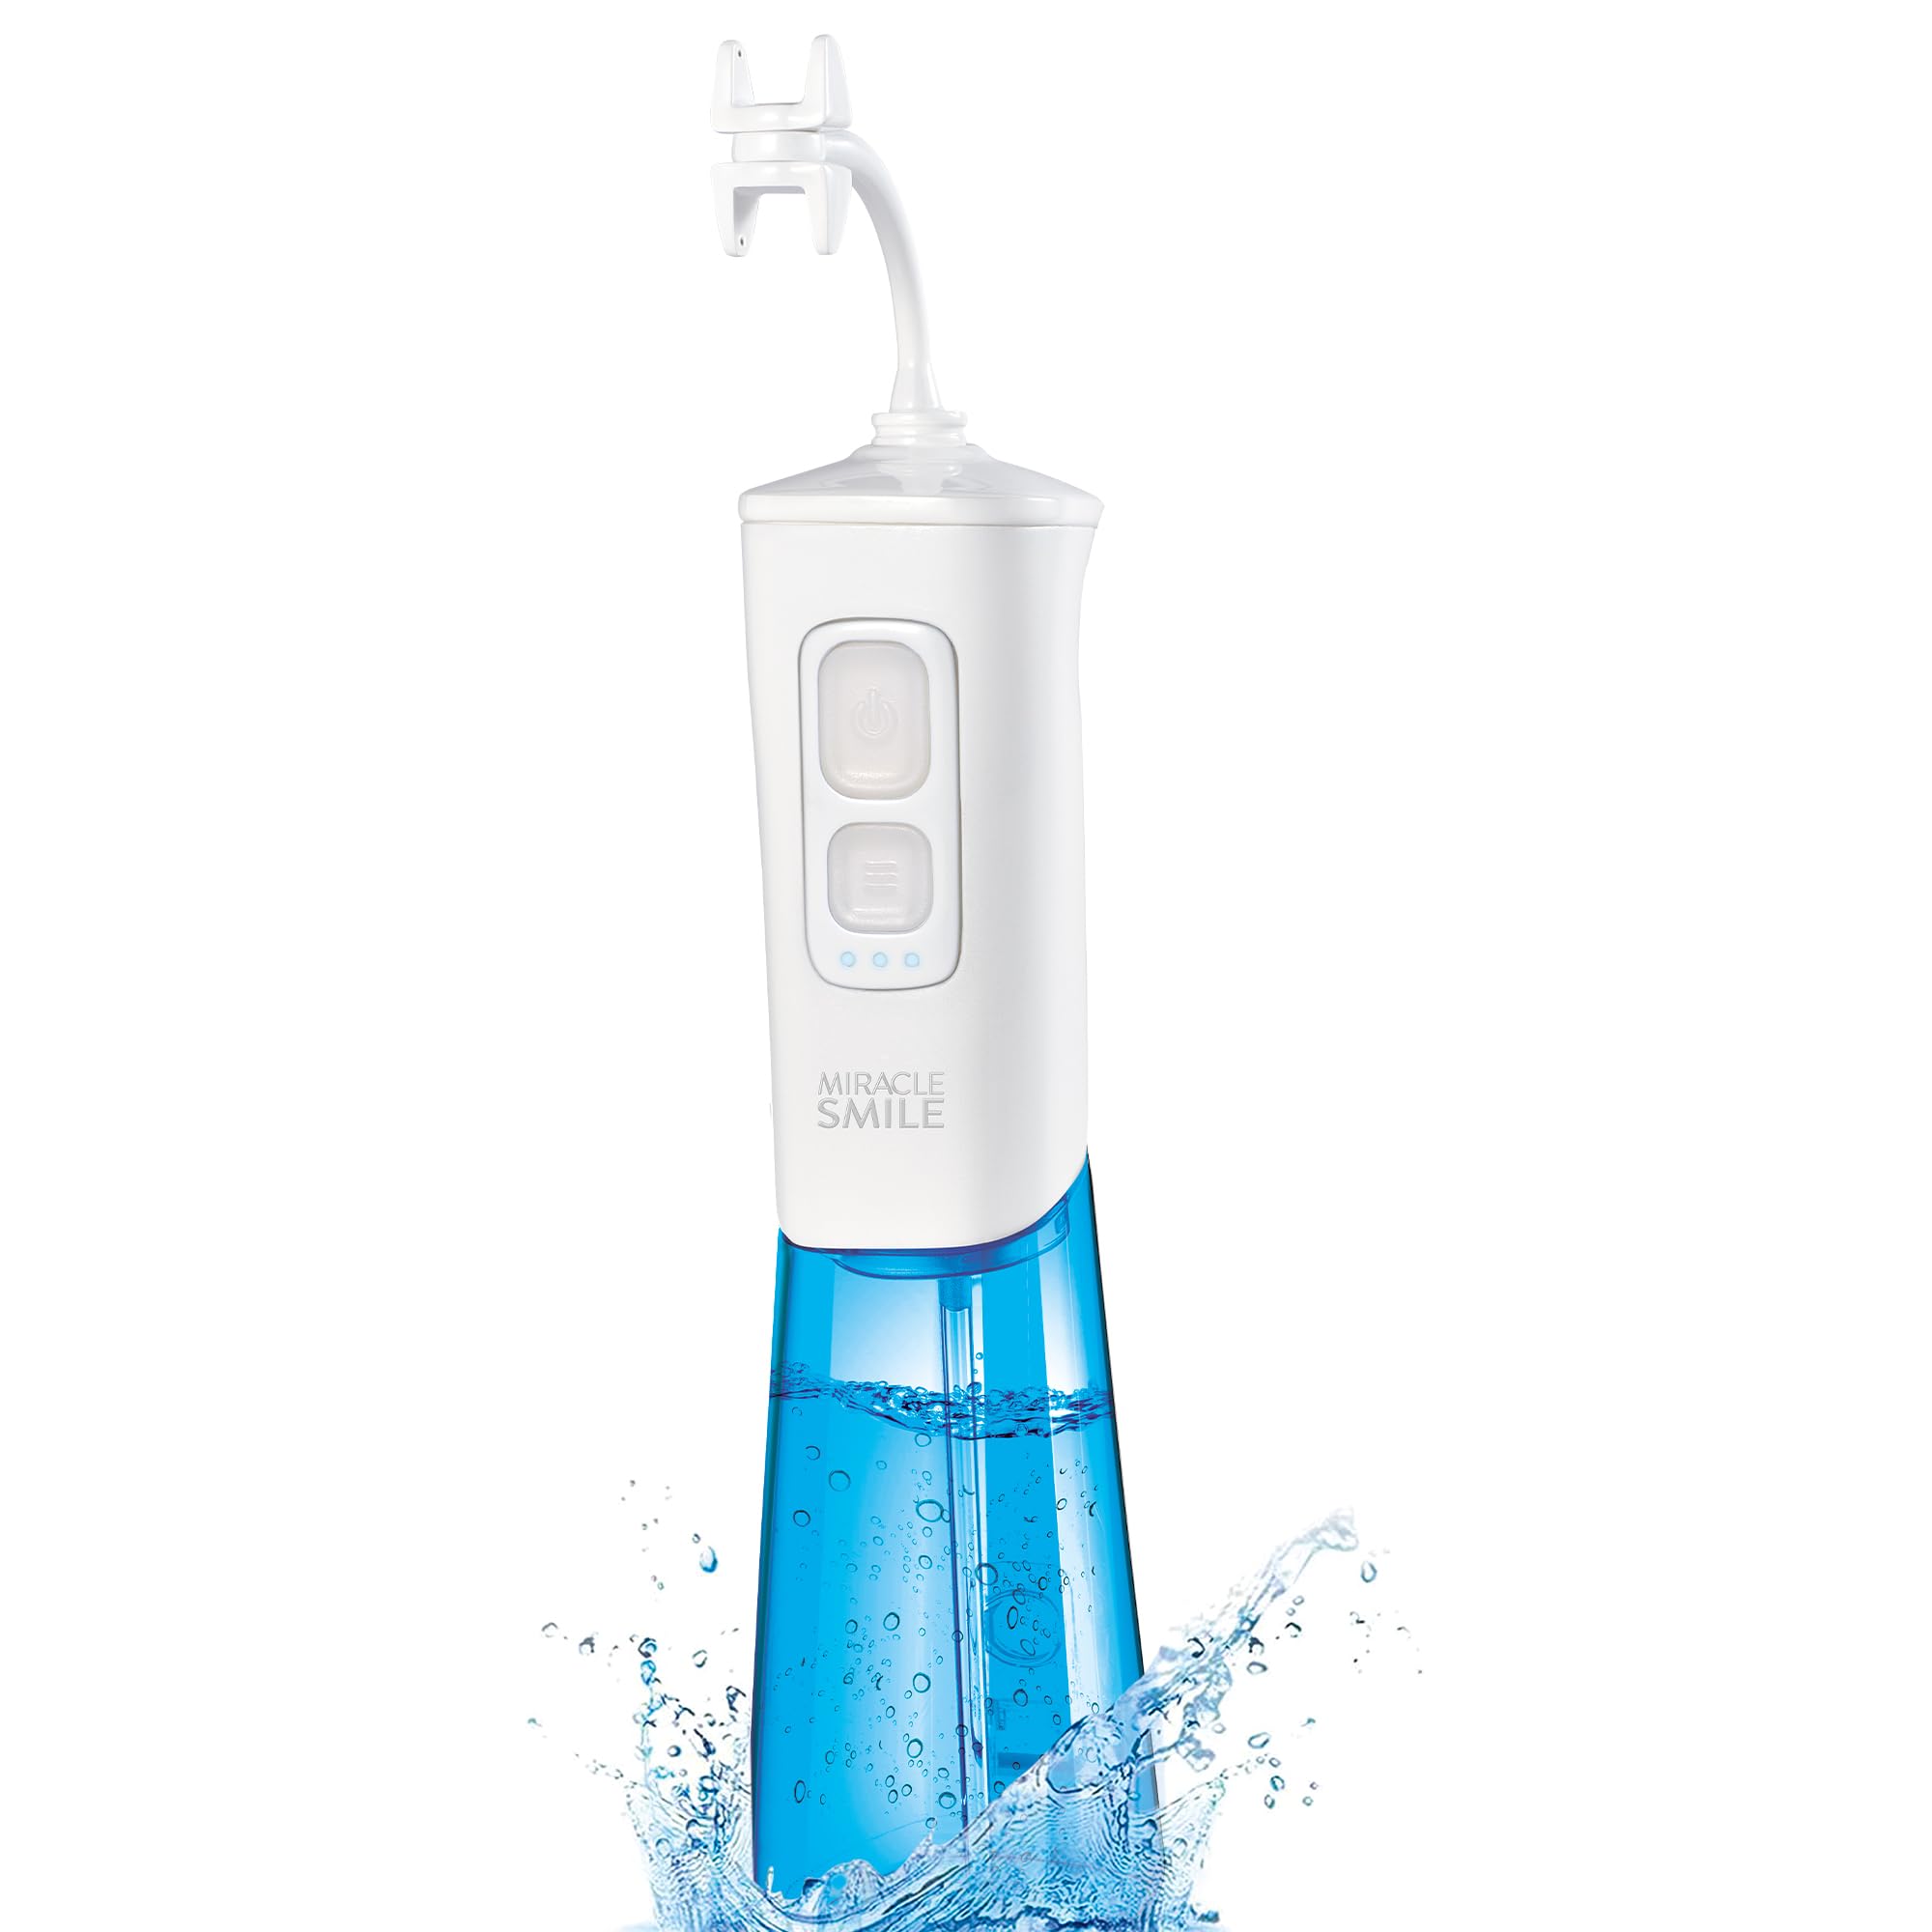 Ontel Miracle Smile Water Flosser for Teeth & Gum Health, Unique H-Shaped Flossing Head & 4 Water Jets, Cordless Water Pick Features 360° Cleaning & 3 Pressure Modes, USB Rechargeable Dental Floss